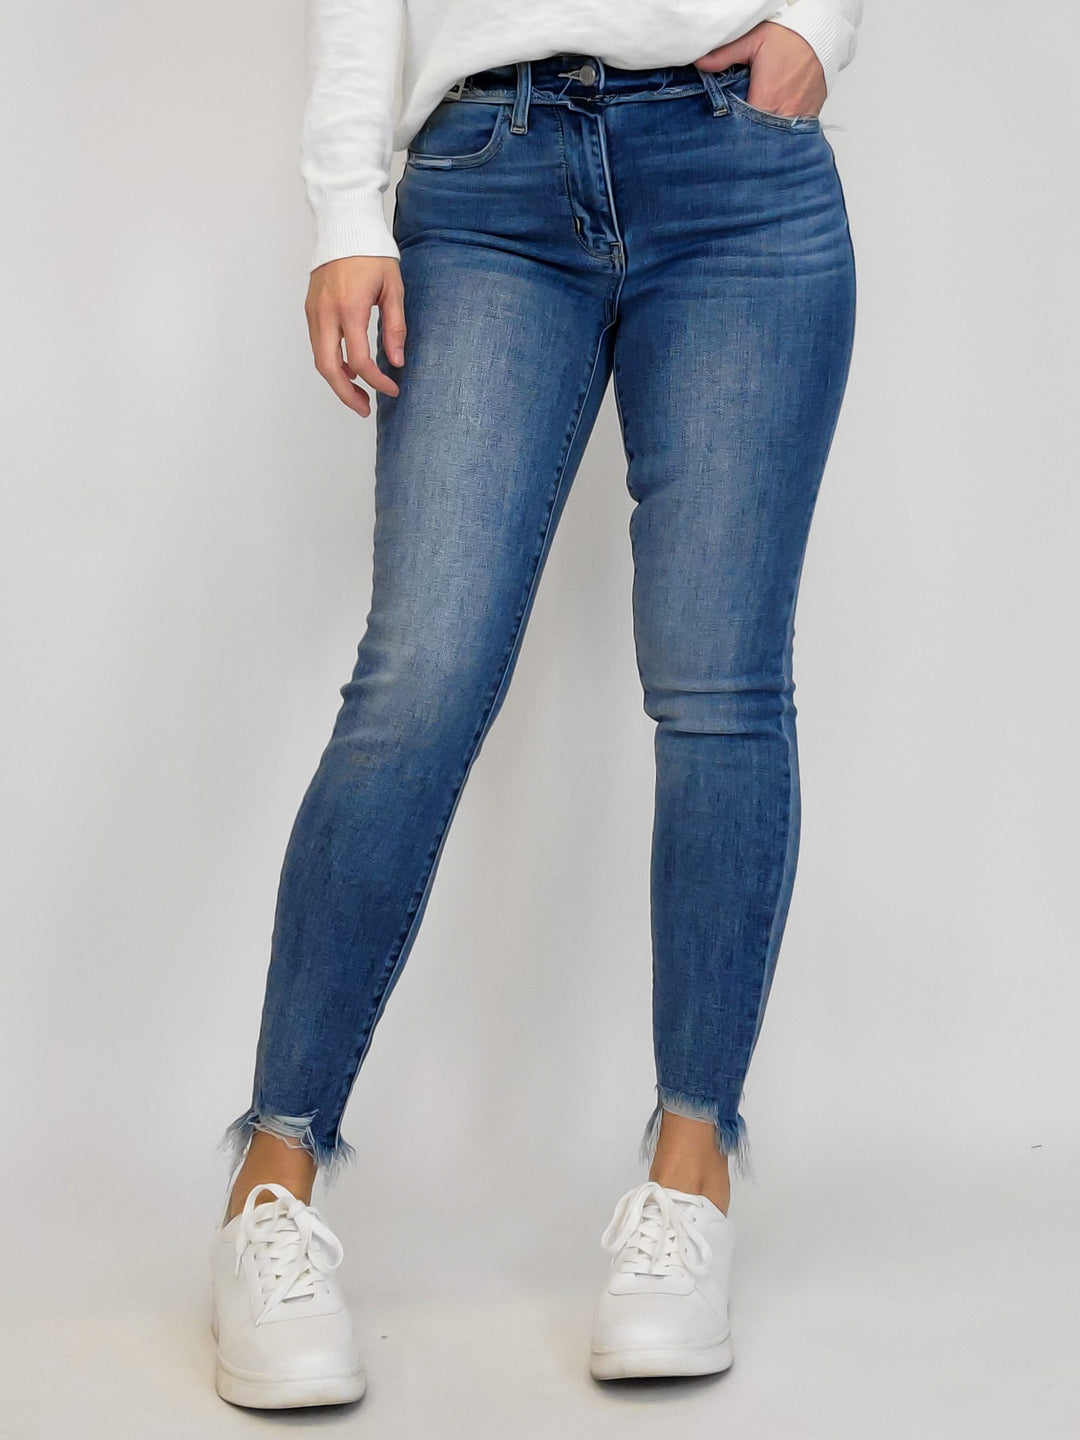 JUDY BLUE MID RISE RELEASED WAIST BAND SKINNY JEAN 28" INSEAM- LT WASH